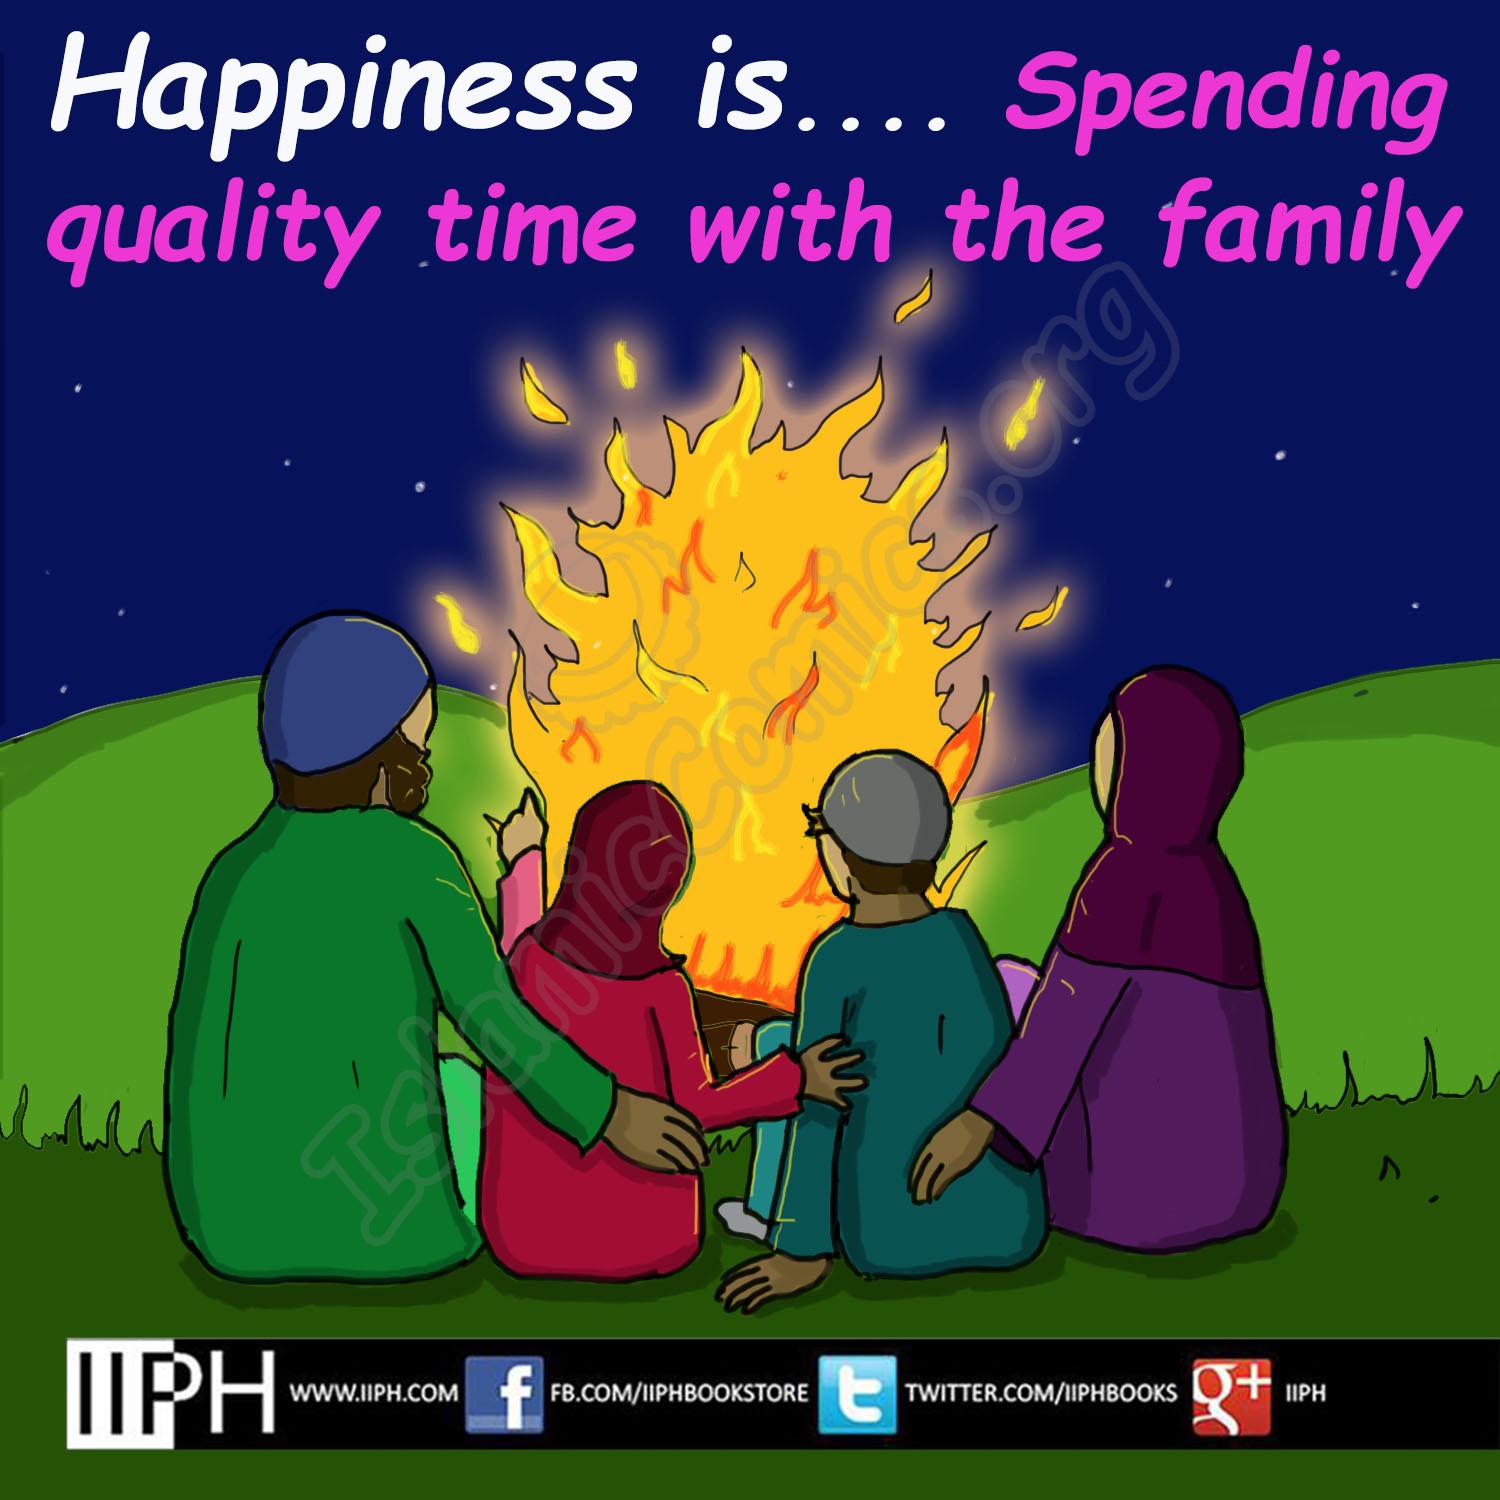 Happiness is spending quality time with the family - Islamic Illustrations (Islamic Comics)